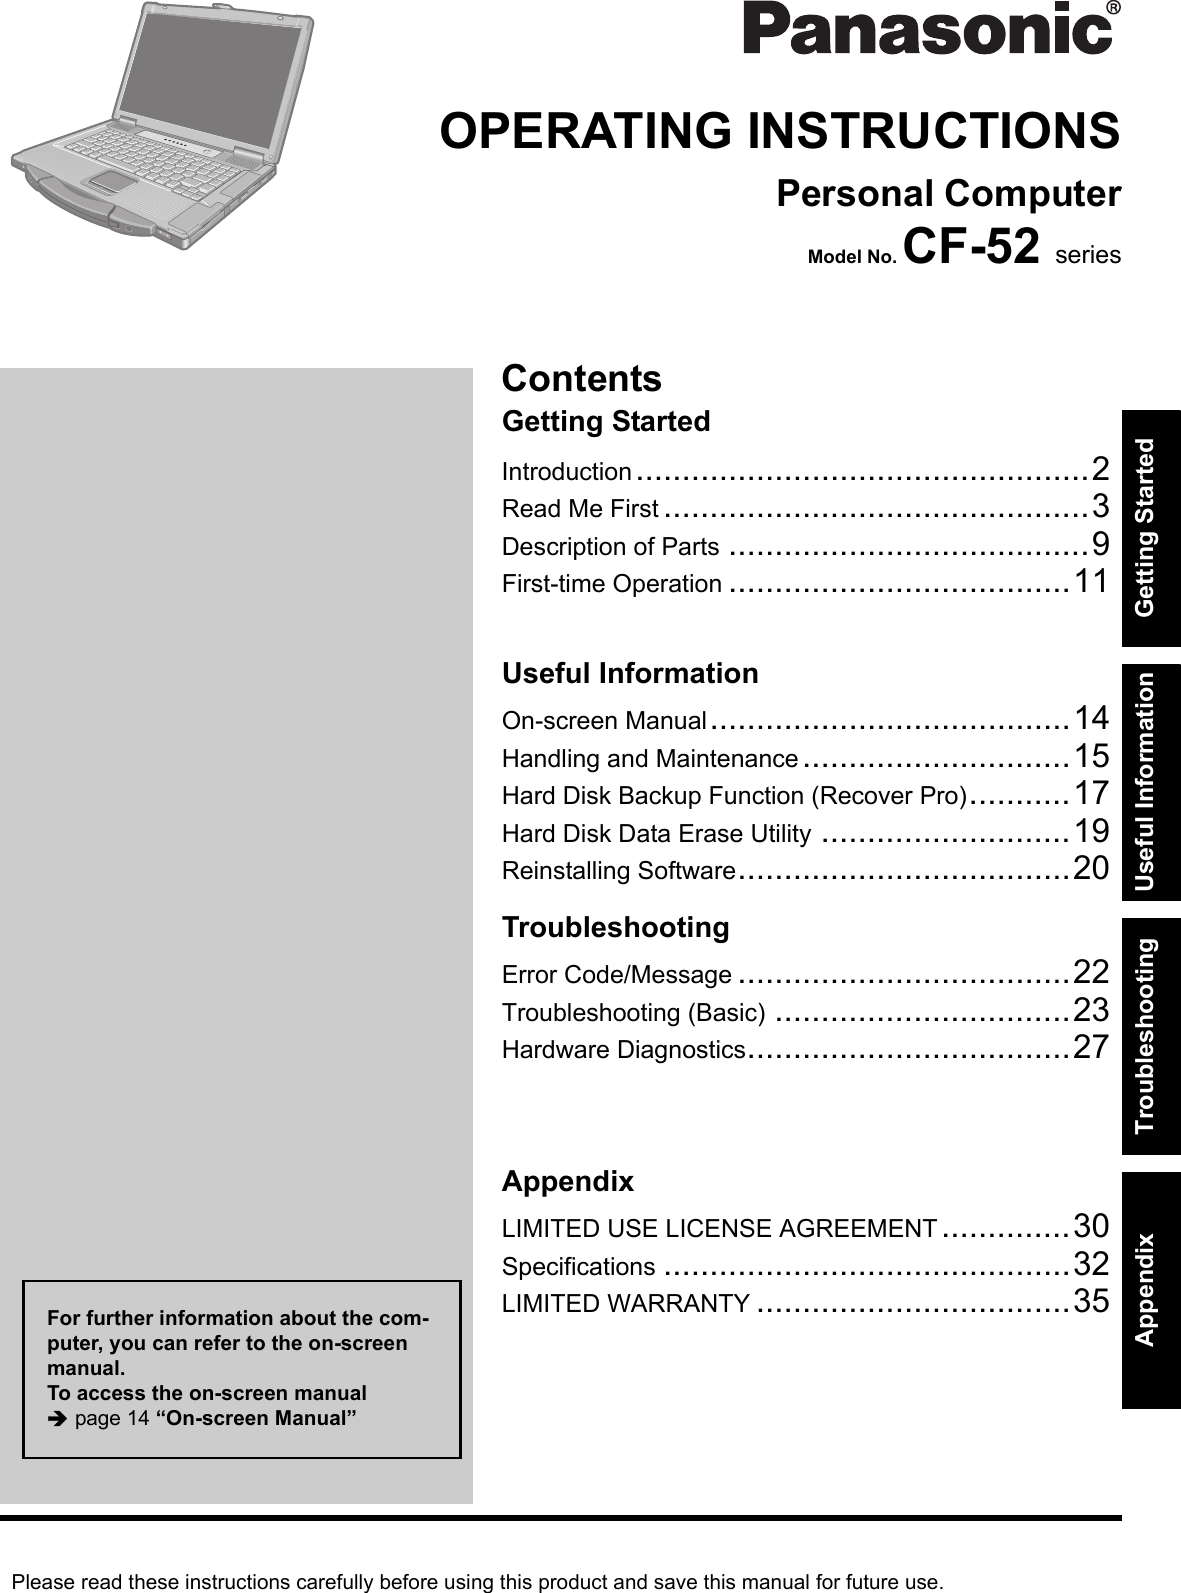 Please read these instructions carefully before using this product and save this manual for future use.ContentsGetting StartedUseful InformationTroubleshootingGetting StartedUseful InformationTroubleshootingAppendixAppendixOPERATING INSTRUCTIONSPersonal ComputerModel No. CF-52 seriesIntroduction.................................................2Read Me First ..............................................3Description of Parts .......................................9First-time Operation .....................................11On-screen Manual.......................................14Handling and Maintenance.............................15Hard Disk Backup Function (Recover Pro)...........17Hard Disk Data Erase Utility ...........................19Reinstalling Software....................................20Error Code/Message ....................................22Troubleshooting (Basic) ................................23Hardware Diagnostics...................................27LIMITED USE LICENSE AGREEMENT..............30Specifications ............................................32LIMITED WARRANTY ..................................35For further information about the com-puter, you can refer to the on-screen manual.To access the on-screen manual page 14 “On-screen Manual”